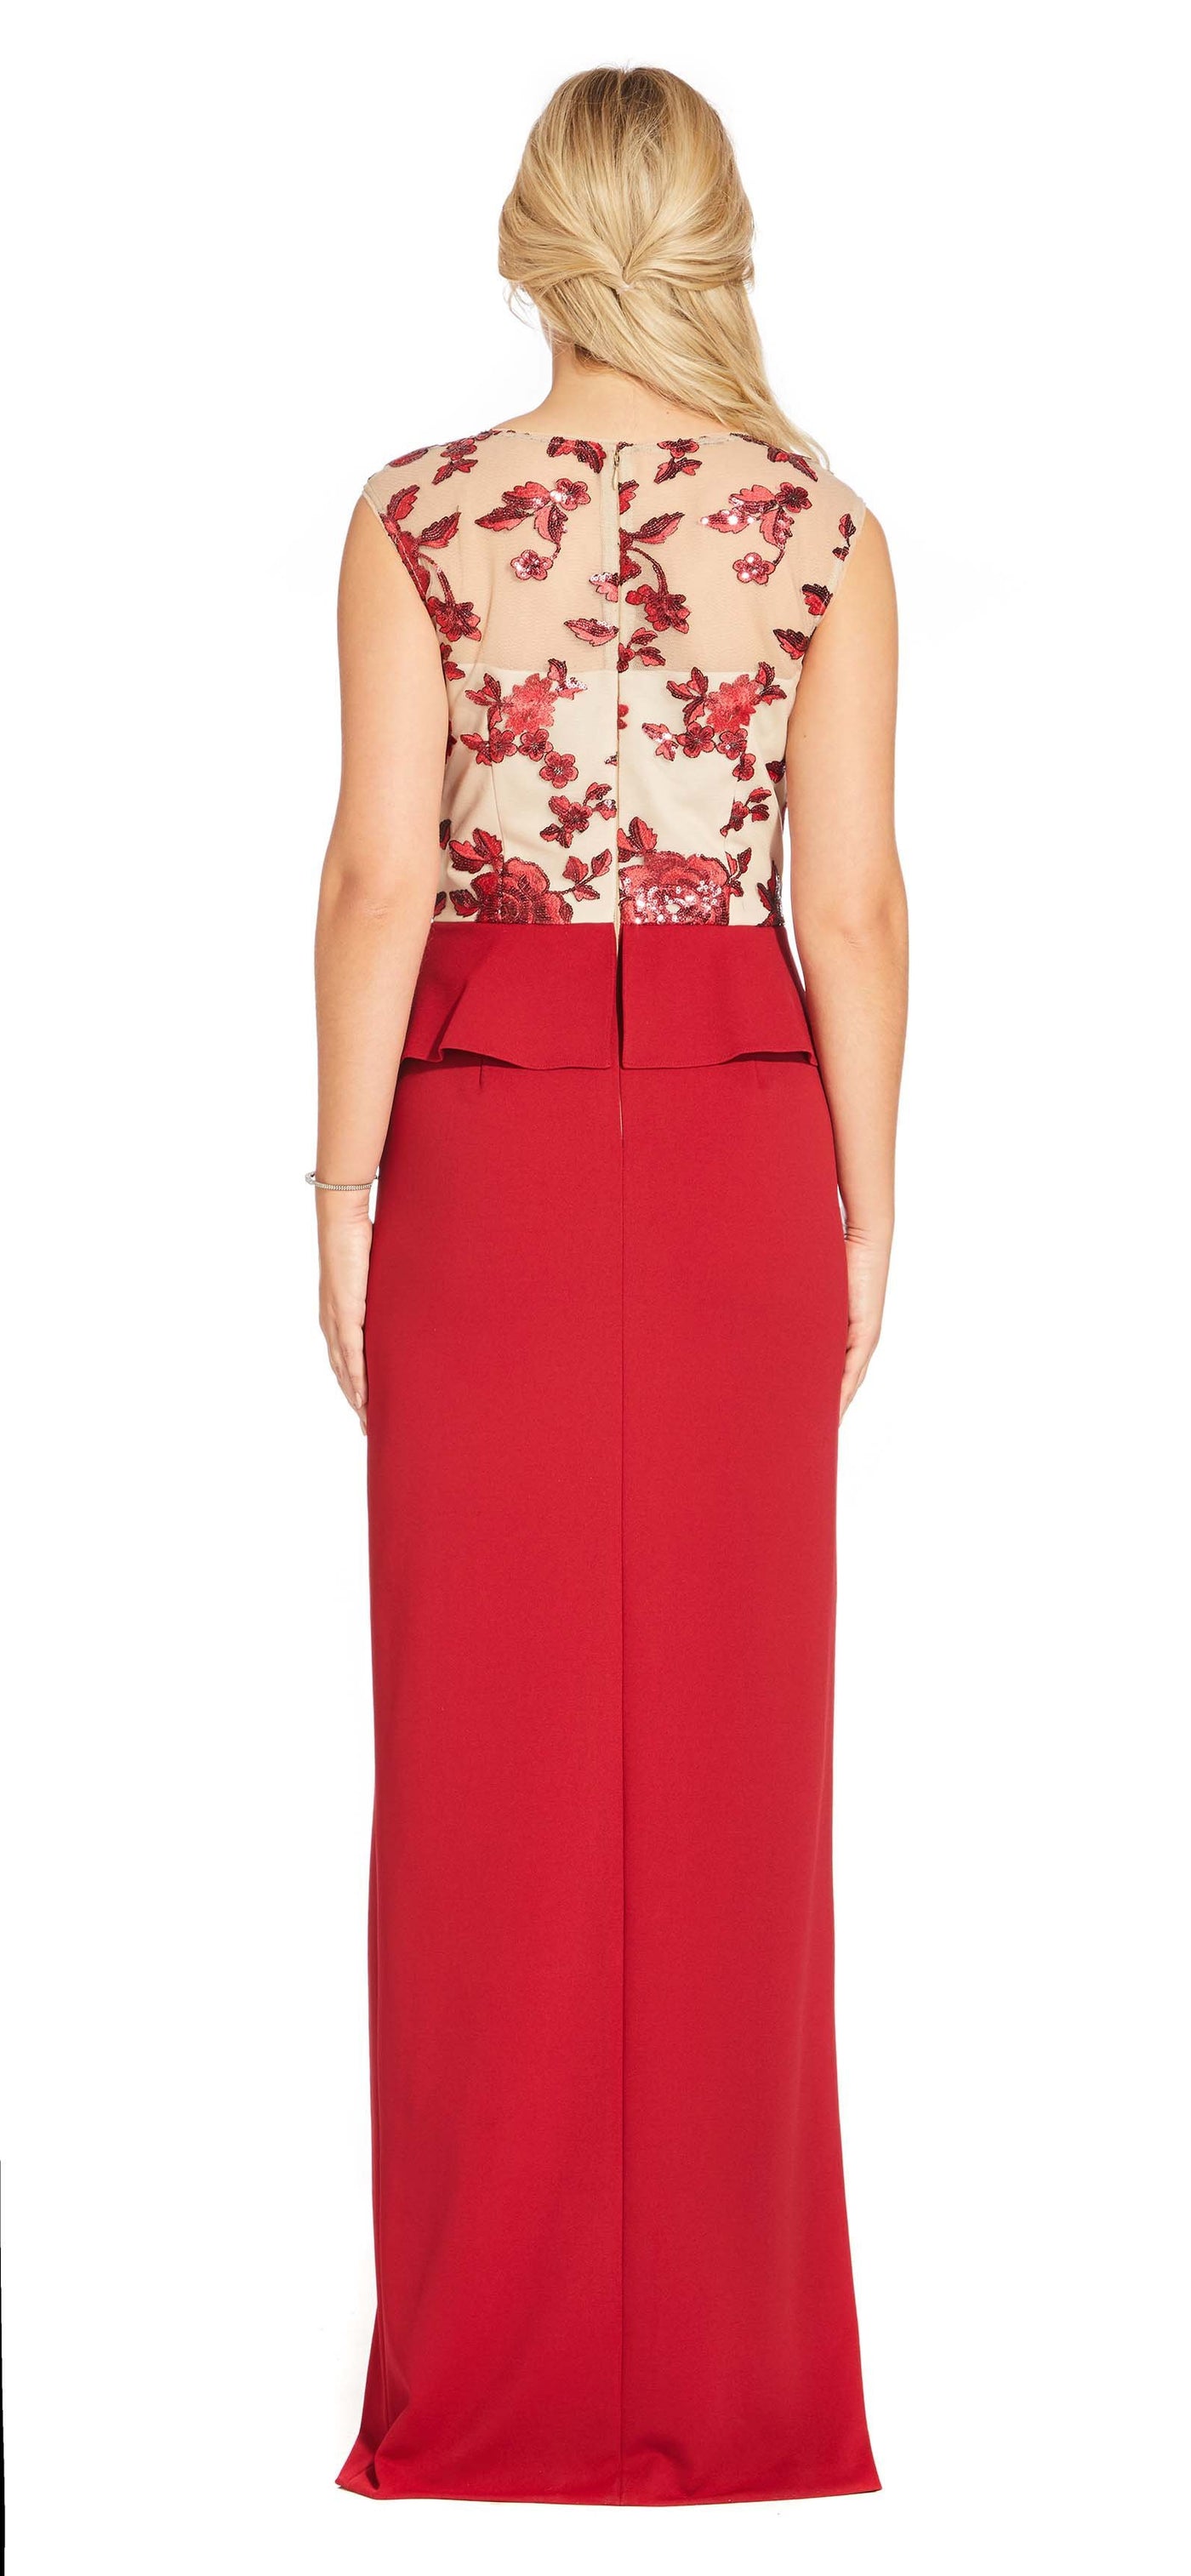 Adrianna Papell - AP1E204361 Floral Sequined Peplum Dress with Slit In Red and Nude